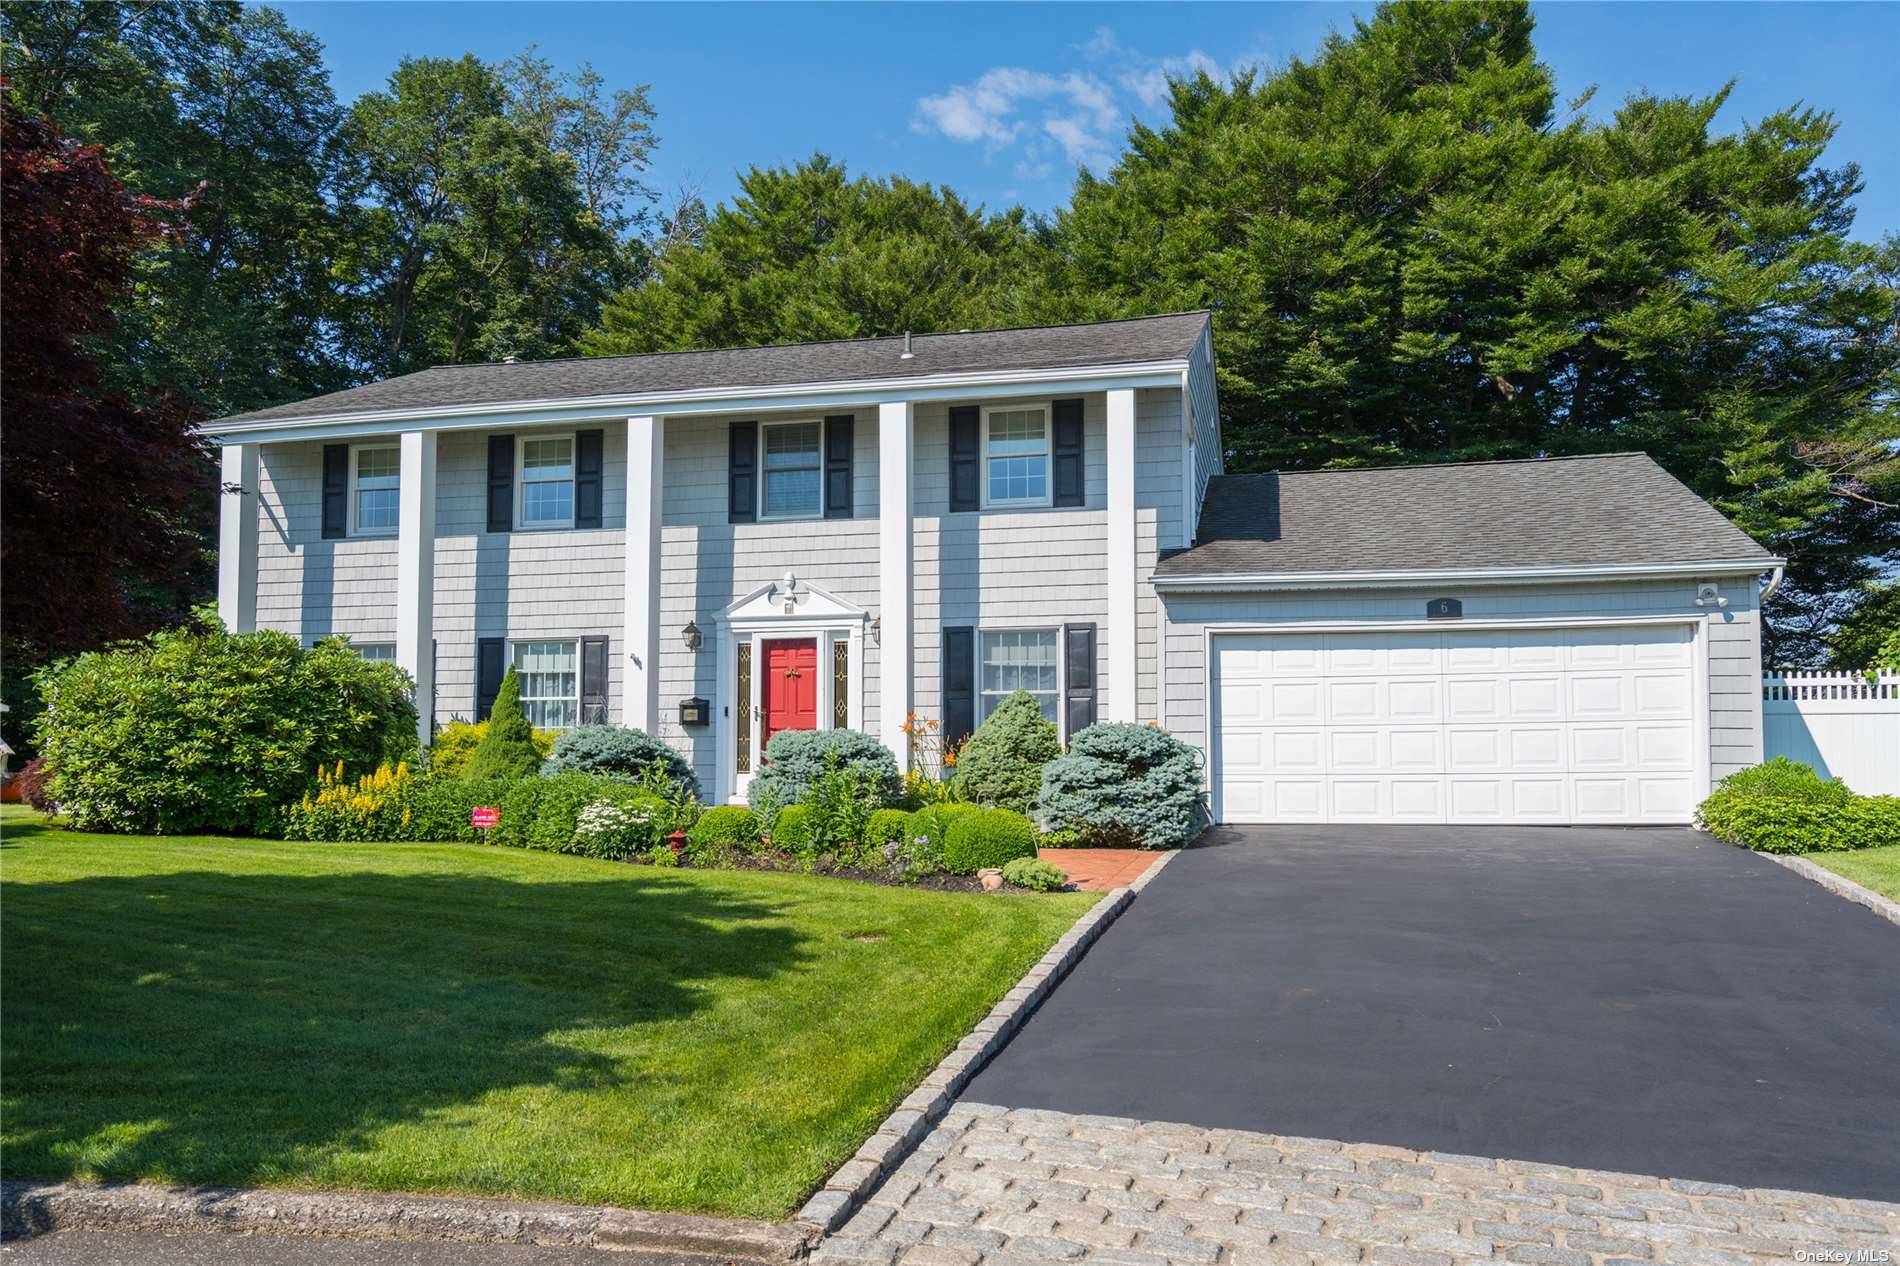 Nestled In The Heart Of Bayville In The Community Of Oak Point Woods Sits This Pristine Center Hall Colonial W Water Views On A Quiet Cul De Sac.